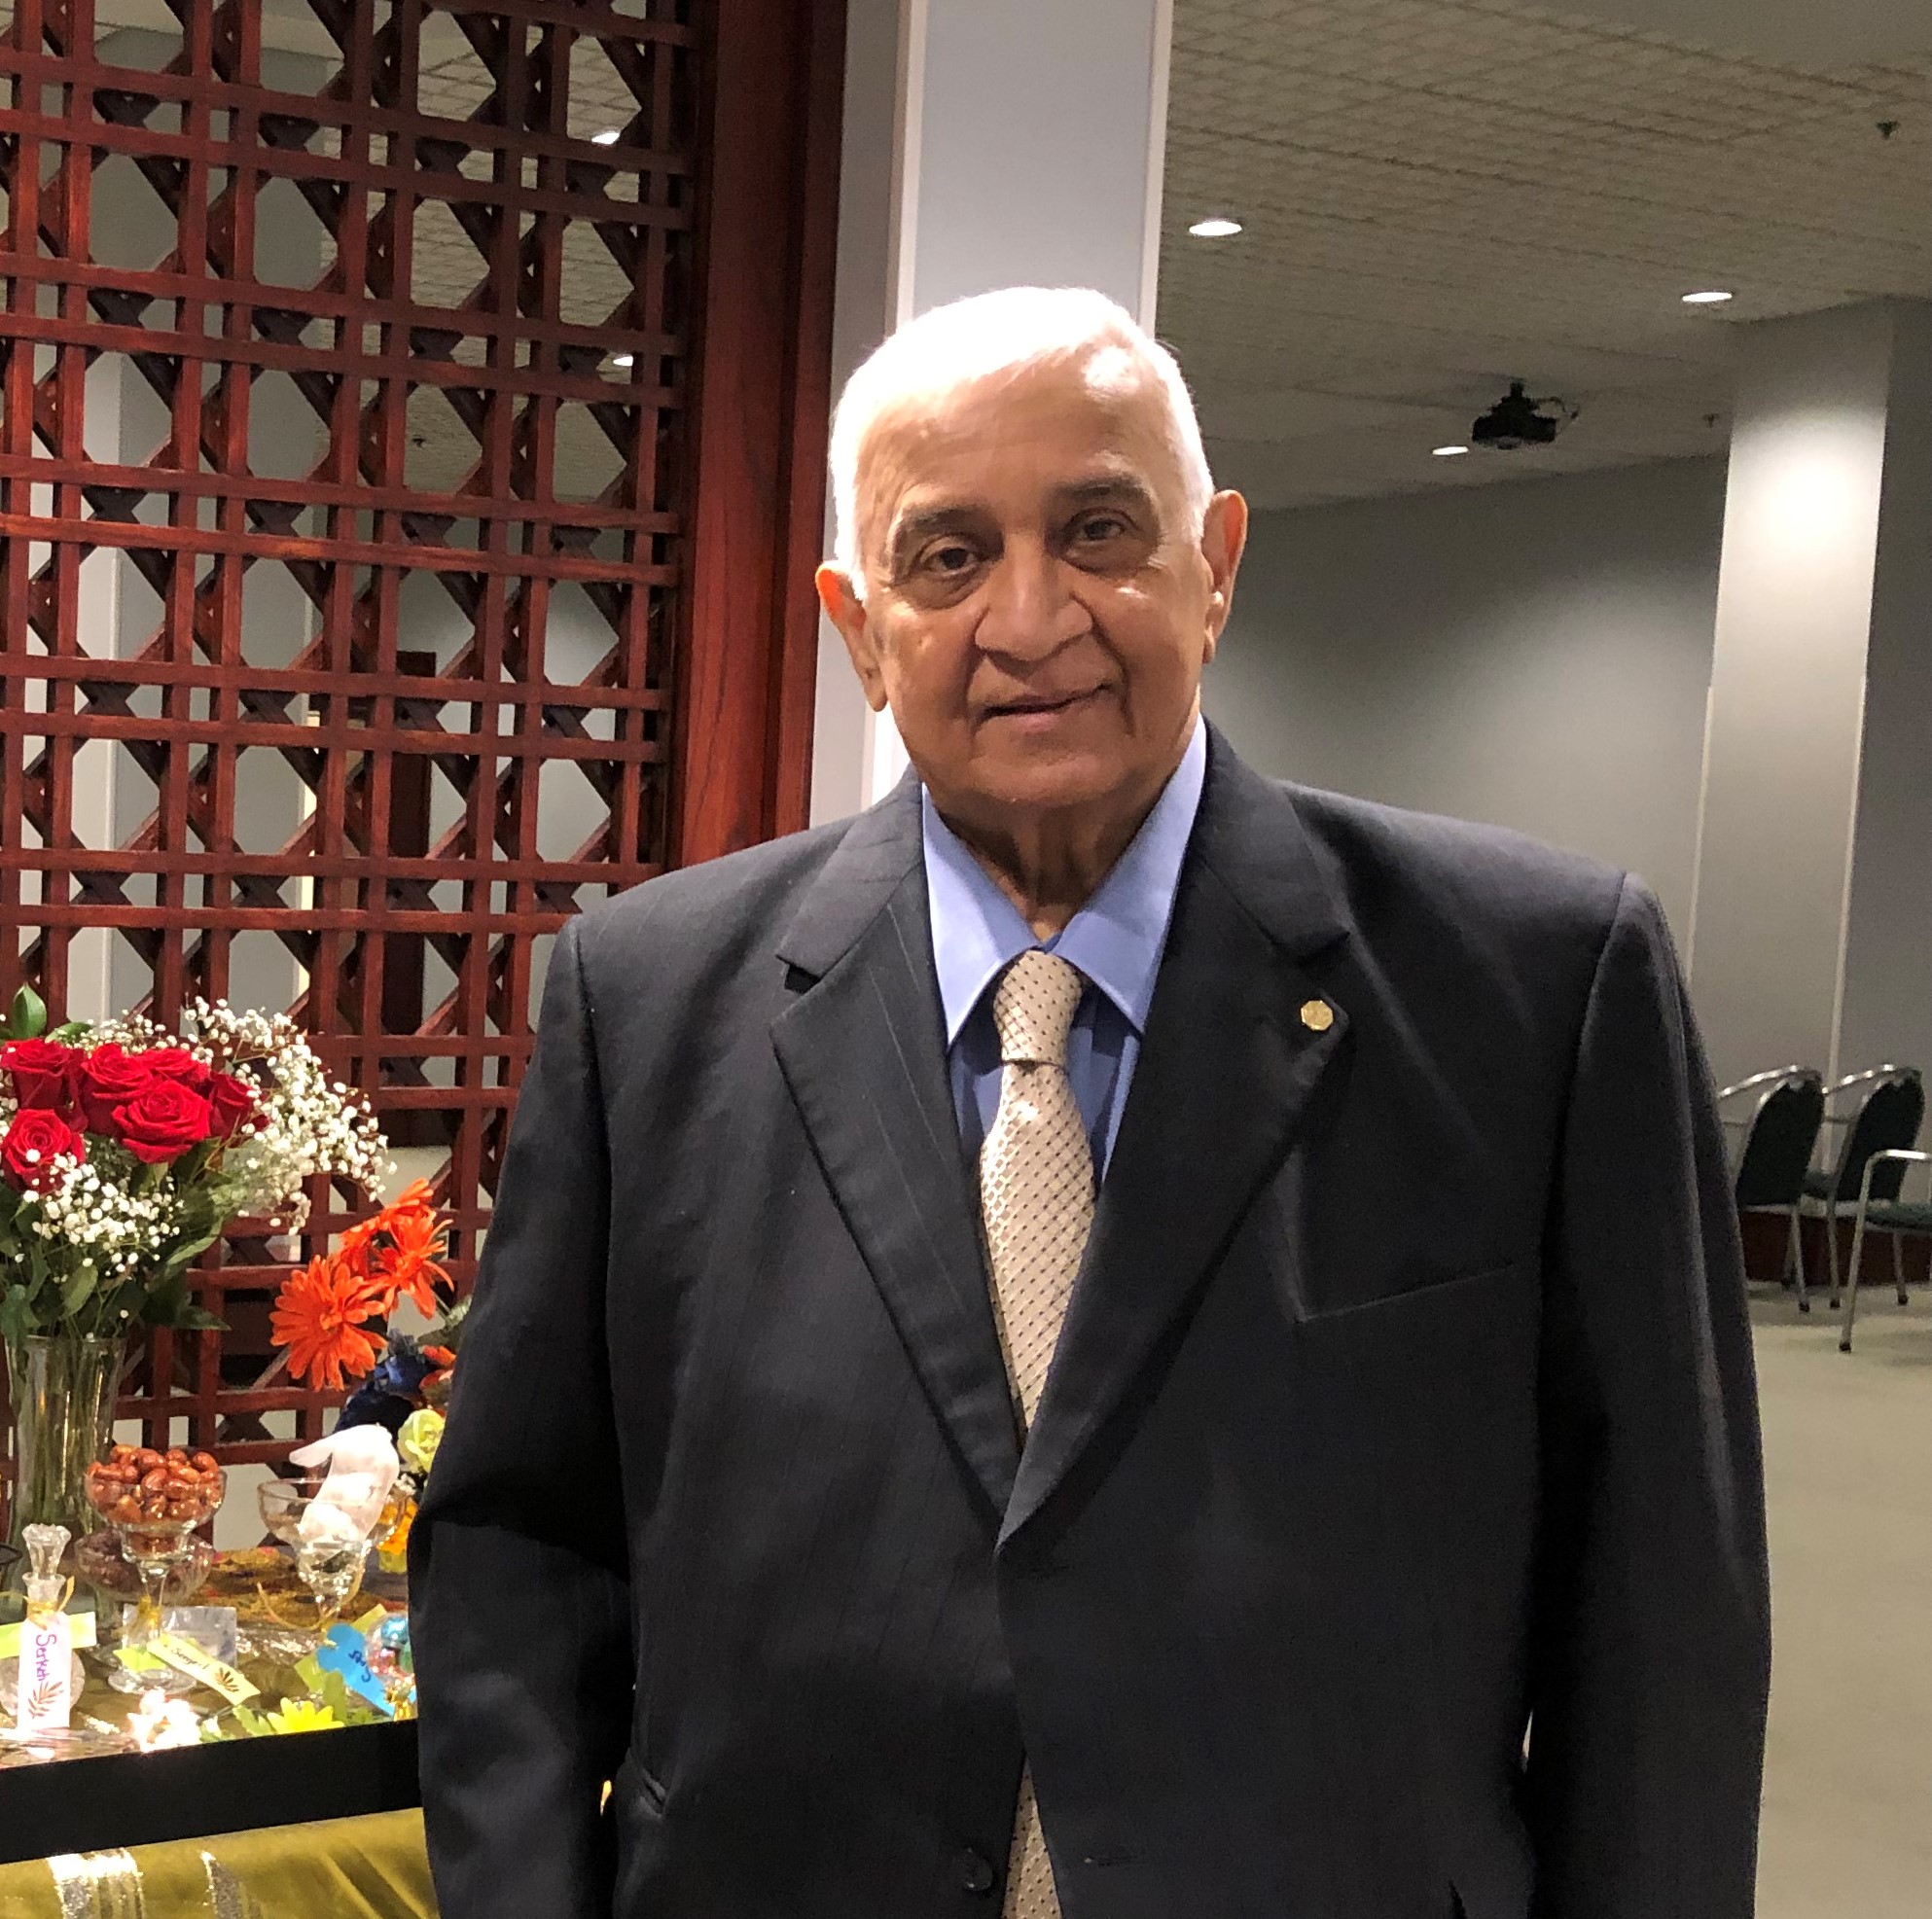 Nizar Hooda wearing a suit and smiling